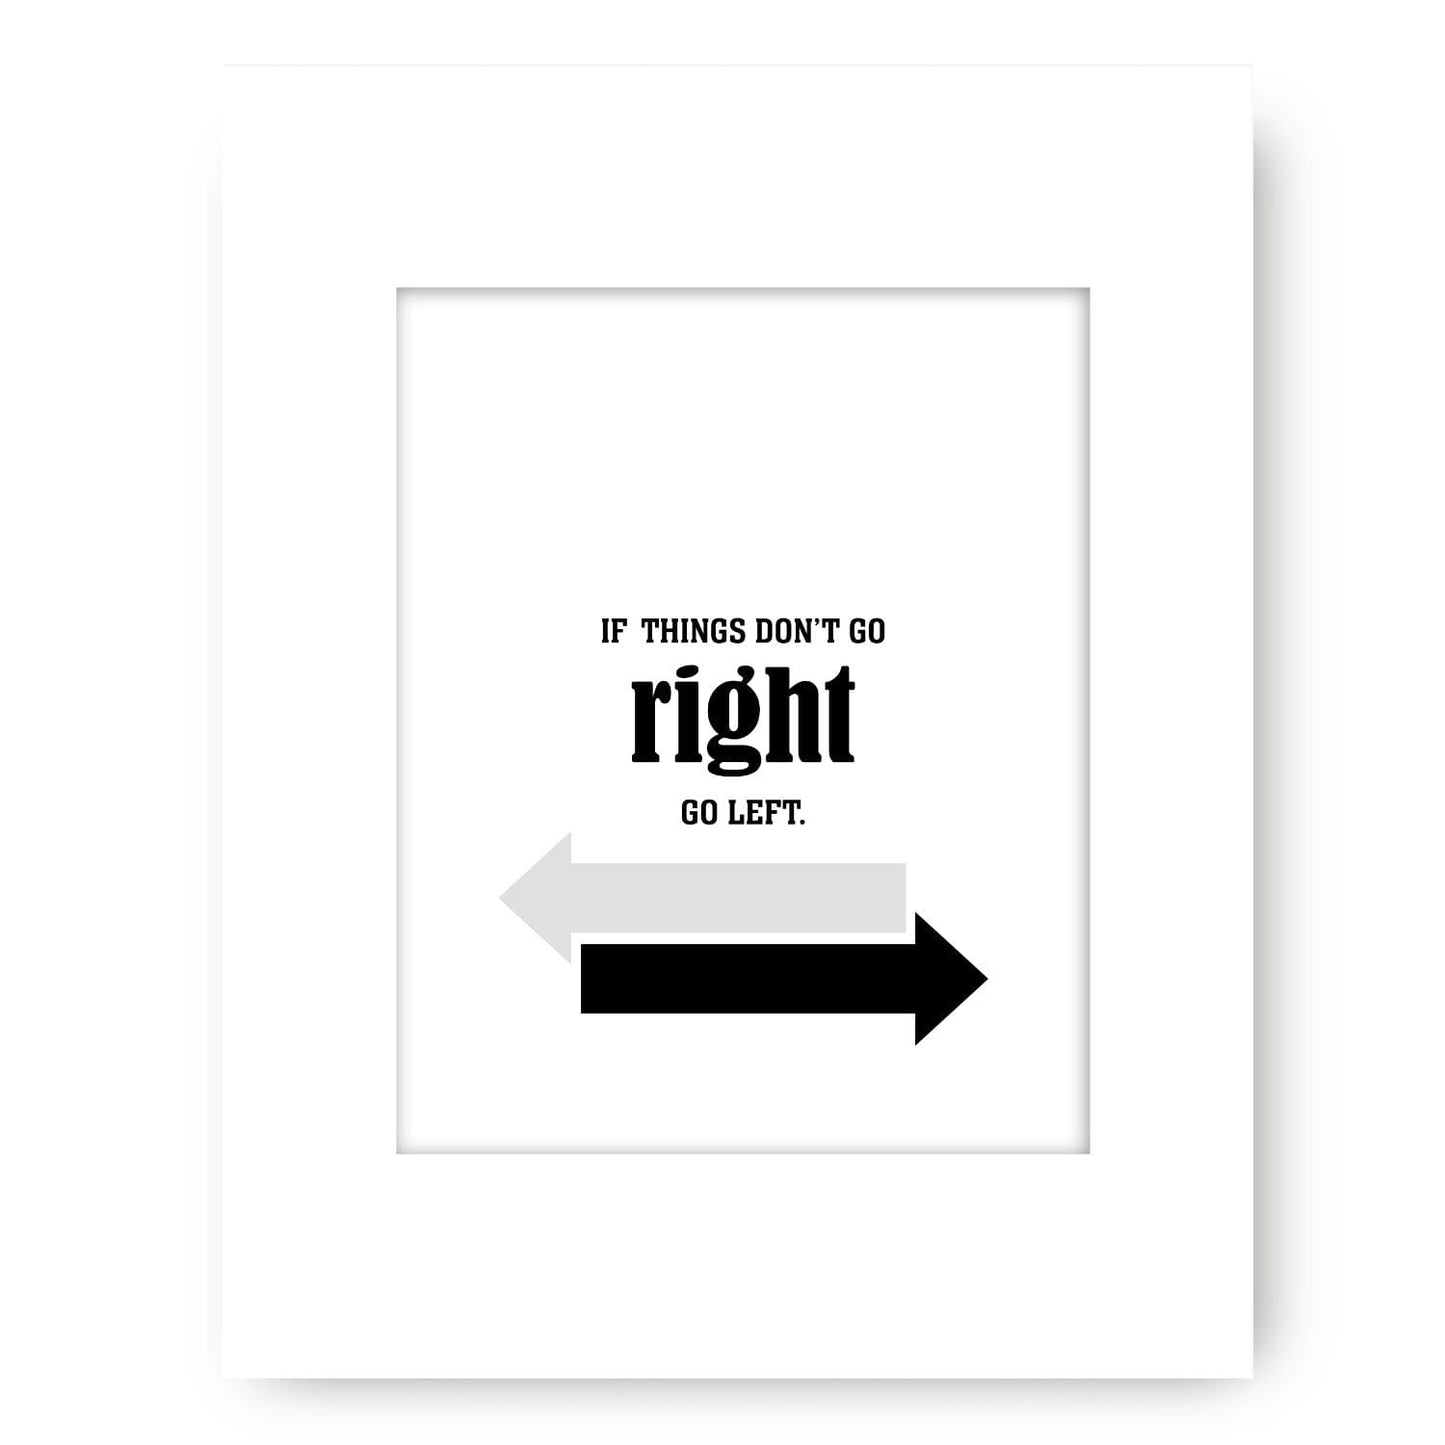 If Things Don't go Right, Go Left - Wise and Witty Word Art Wise and Wiseass Quotes Song Lyrics Art 8x10 White Matted Print 